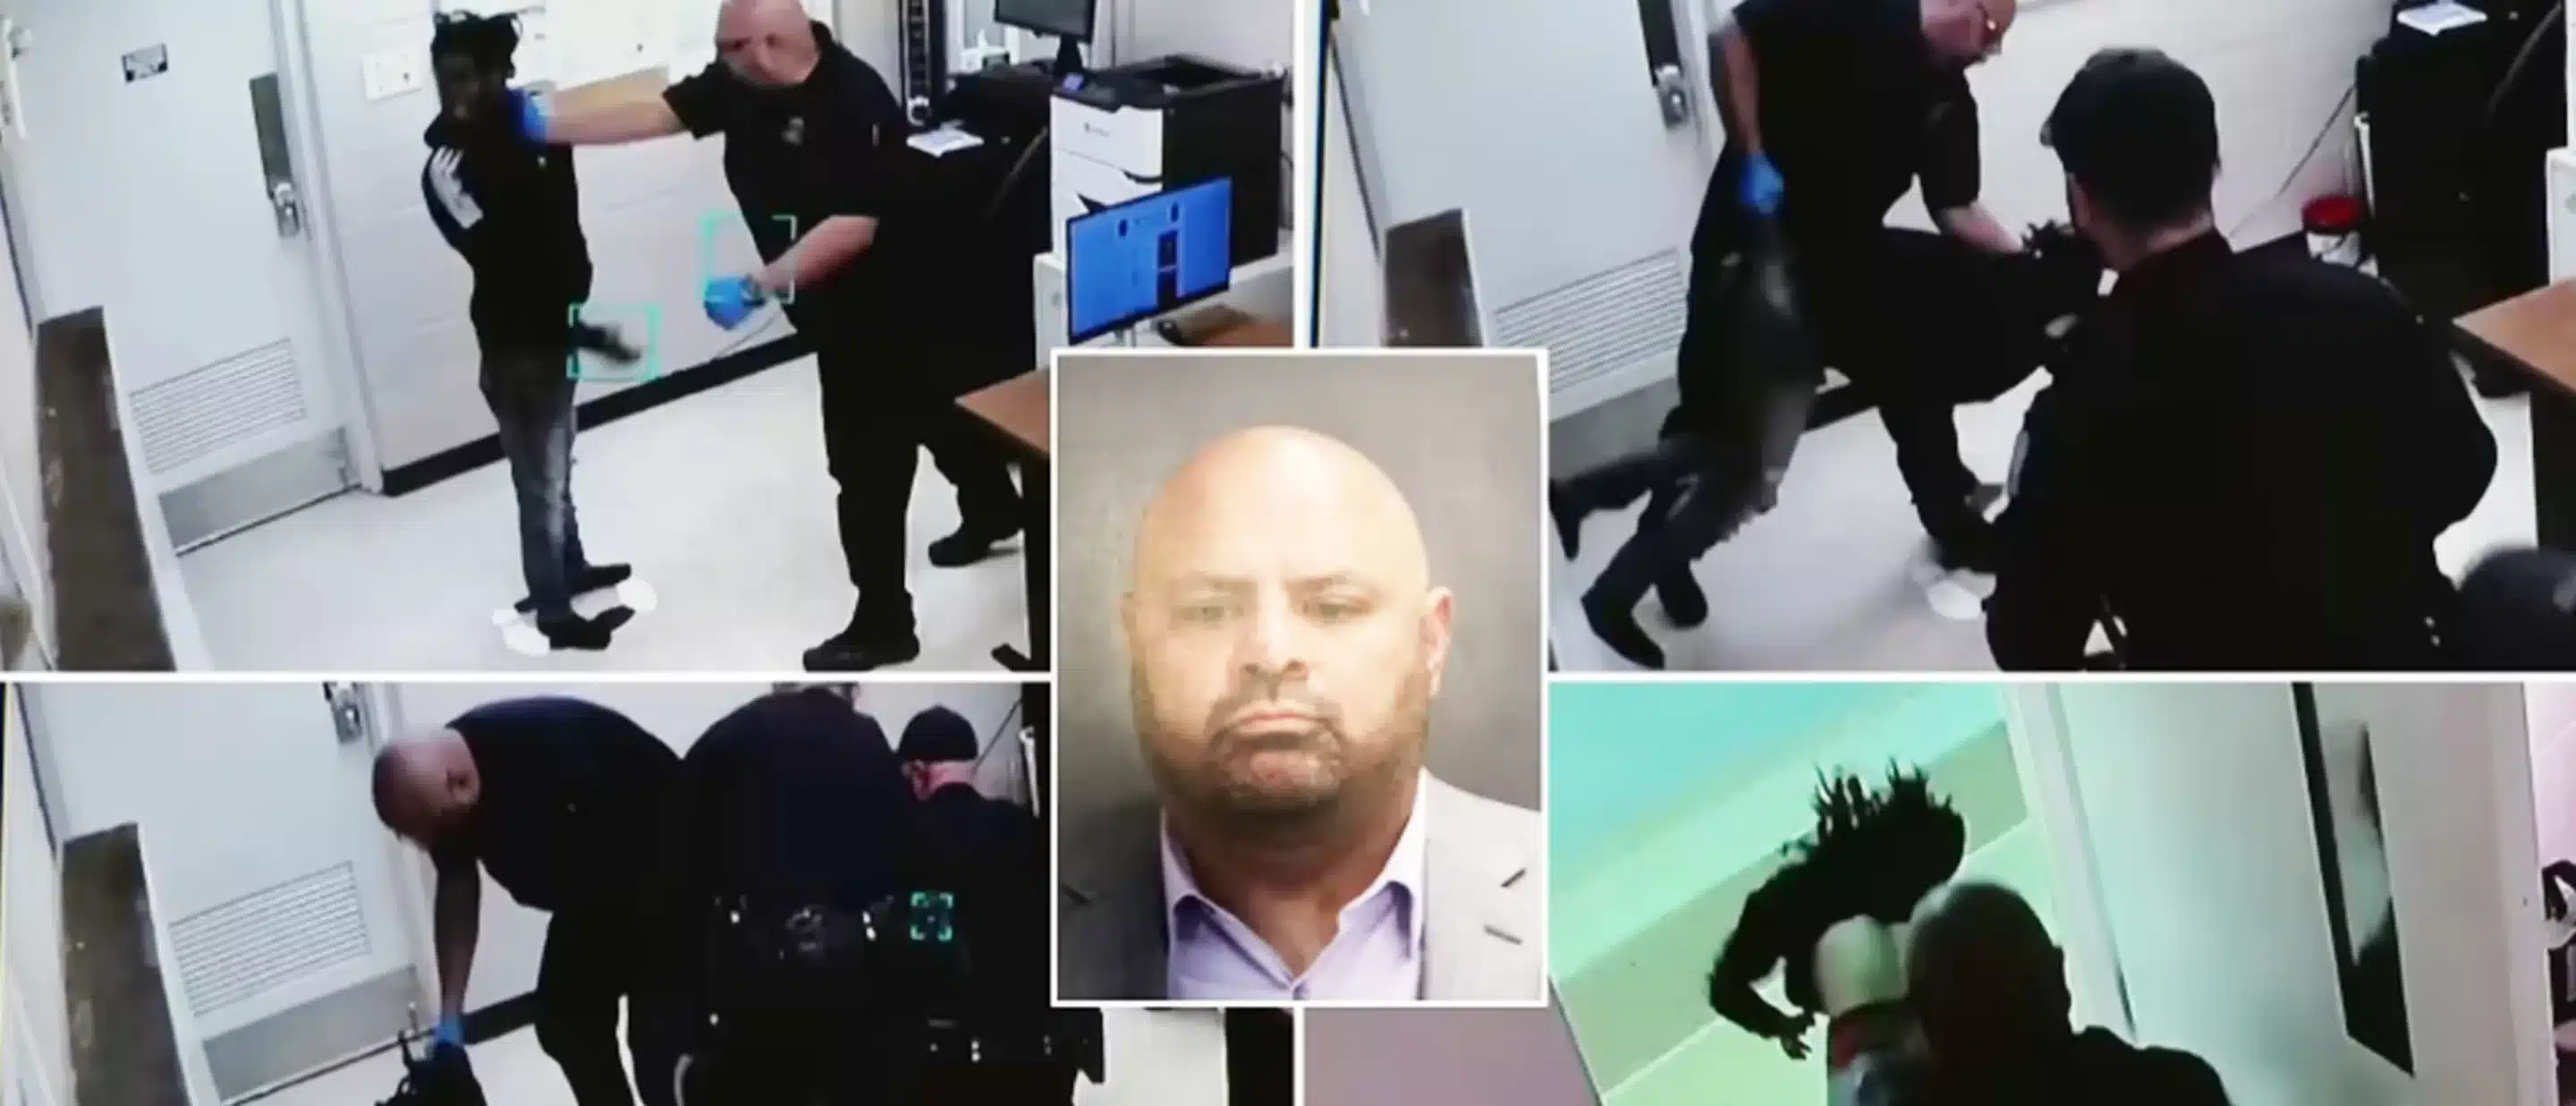 WATCH: Cop Arrested After Punching Compliant Man, Bashing His Head into Concrete Floor